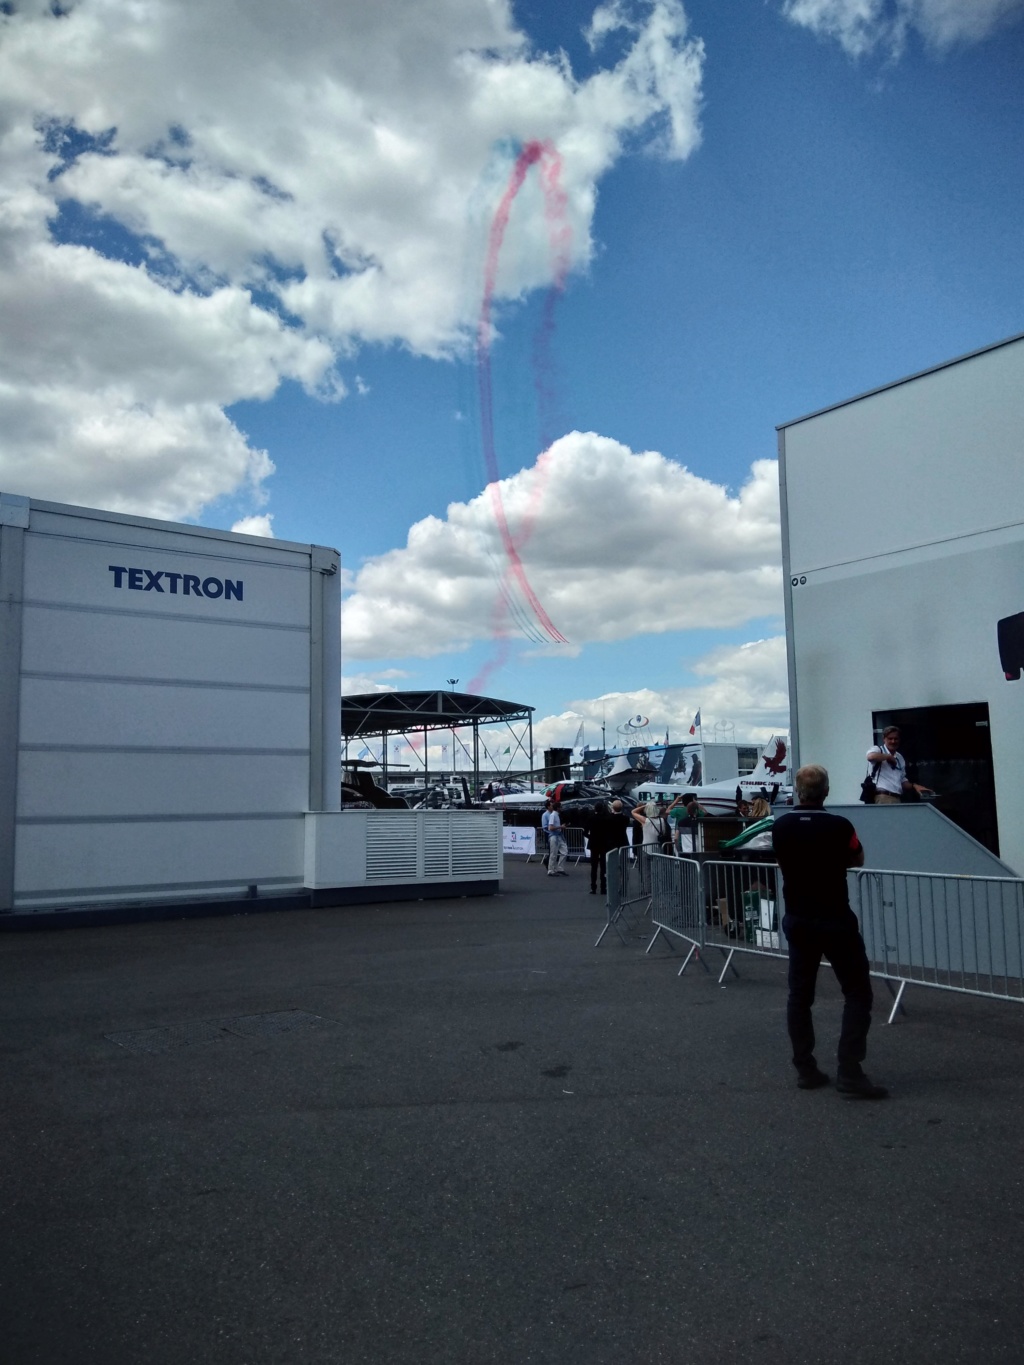 Le Bourget 2019 2019_s83